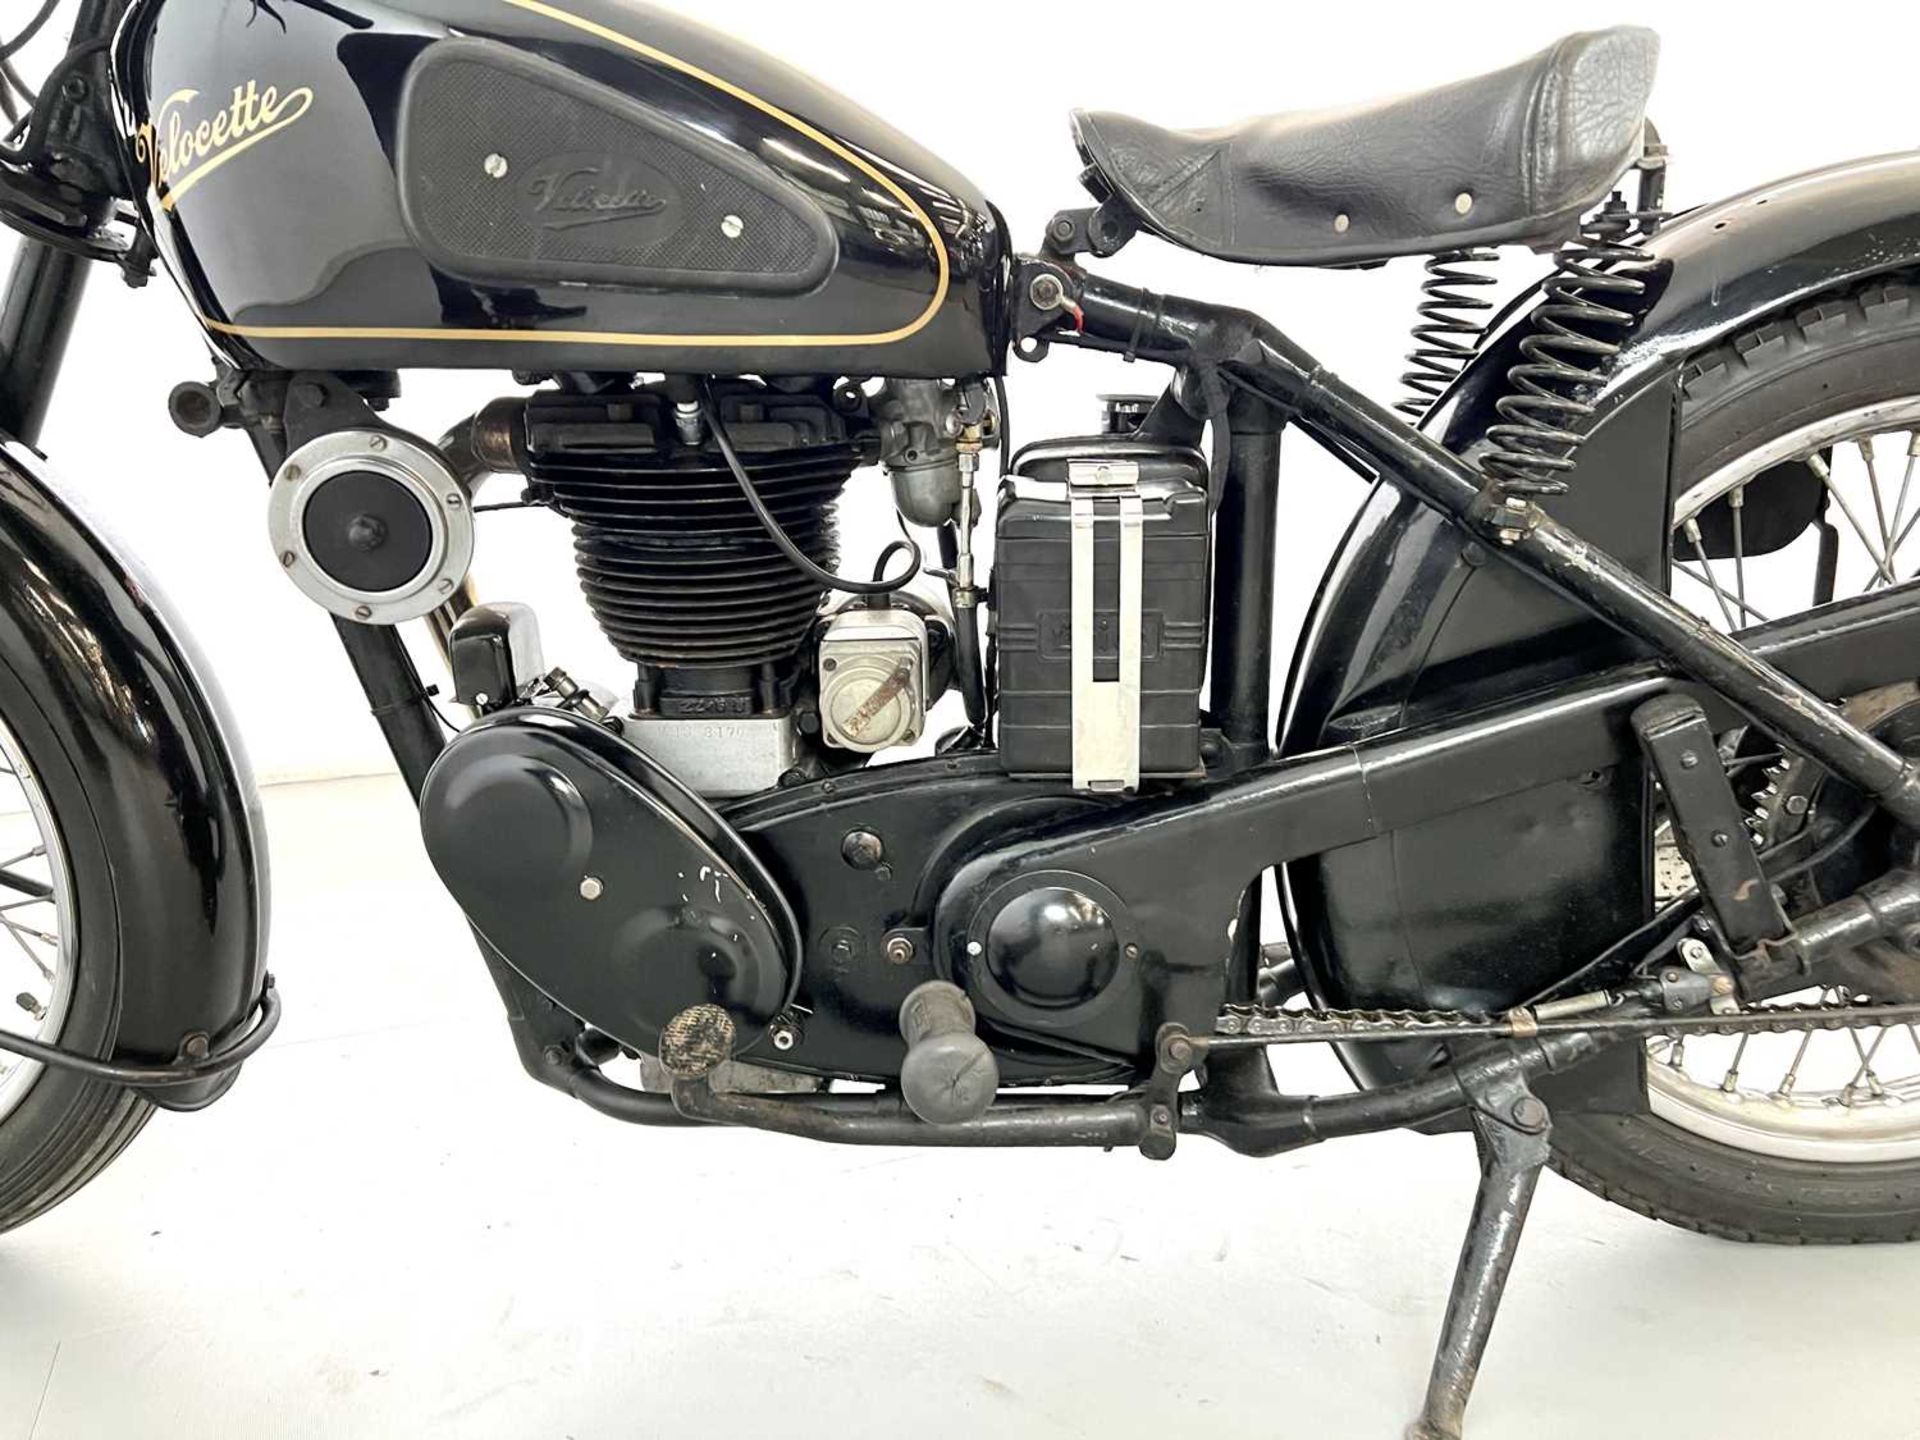 1948 Velocette MSS - Image 8 of 16